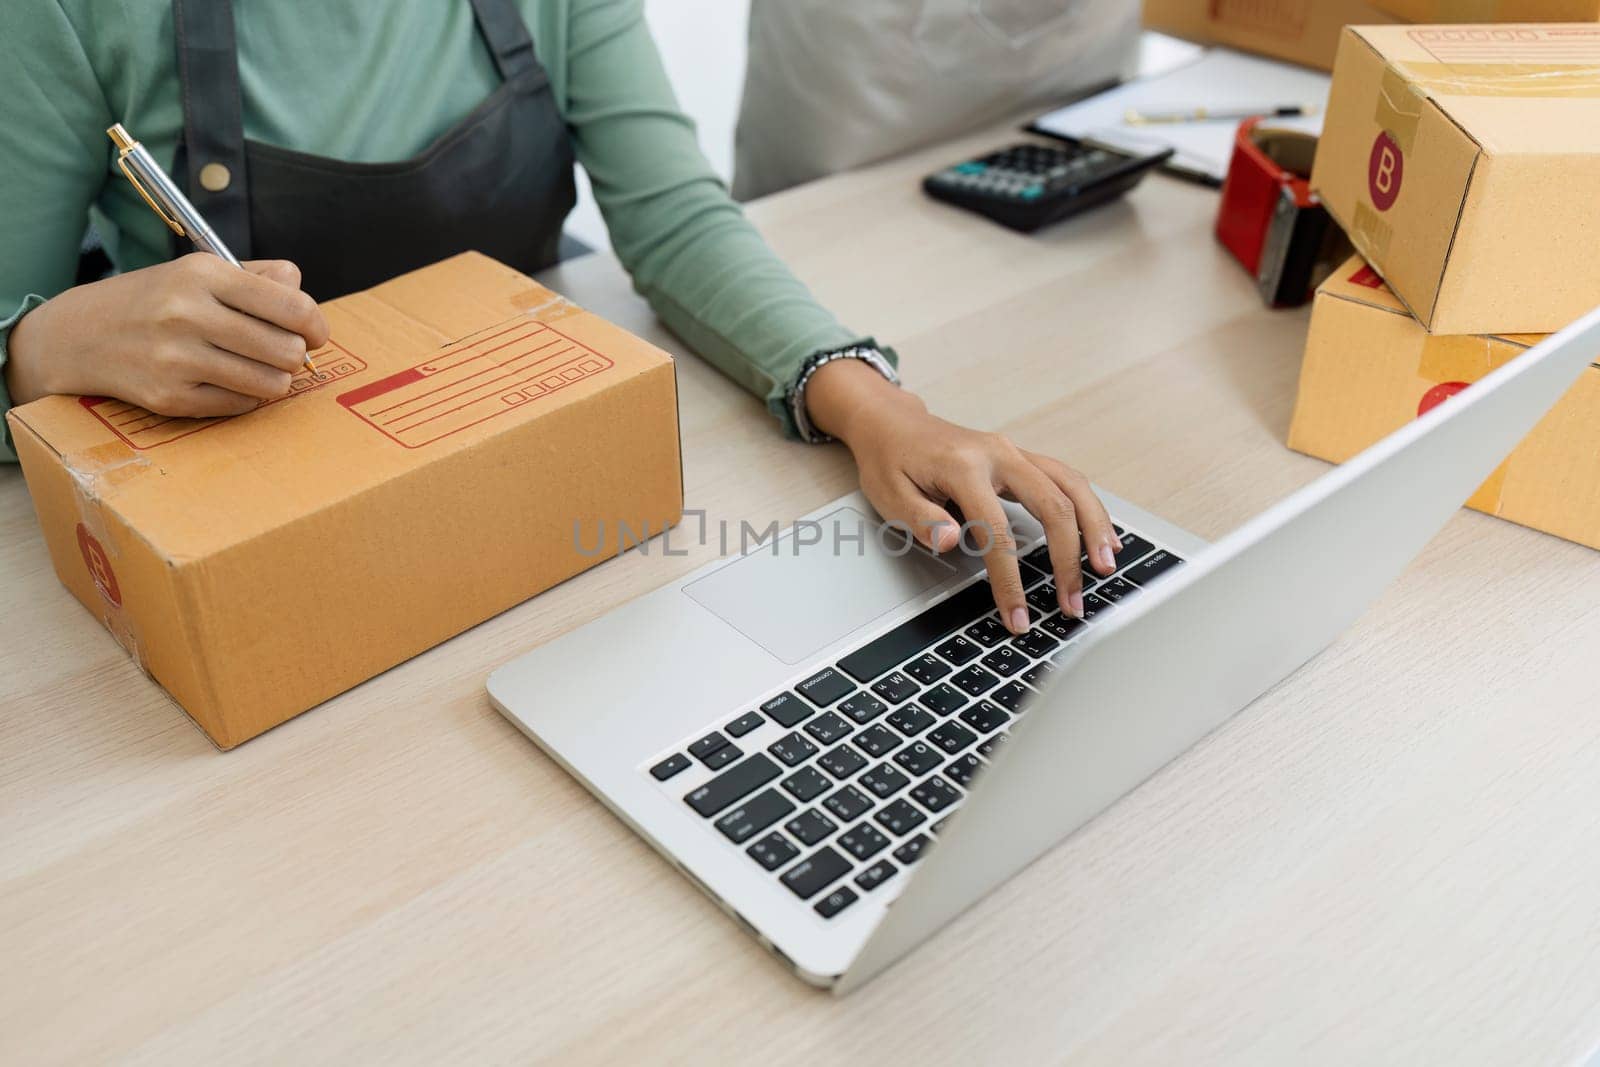 Asian woman using laptop to prepare for delivery to customer. e-business concept.